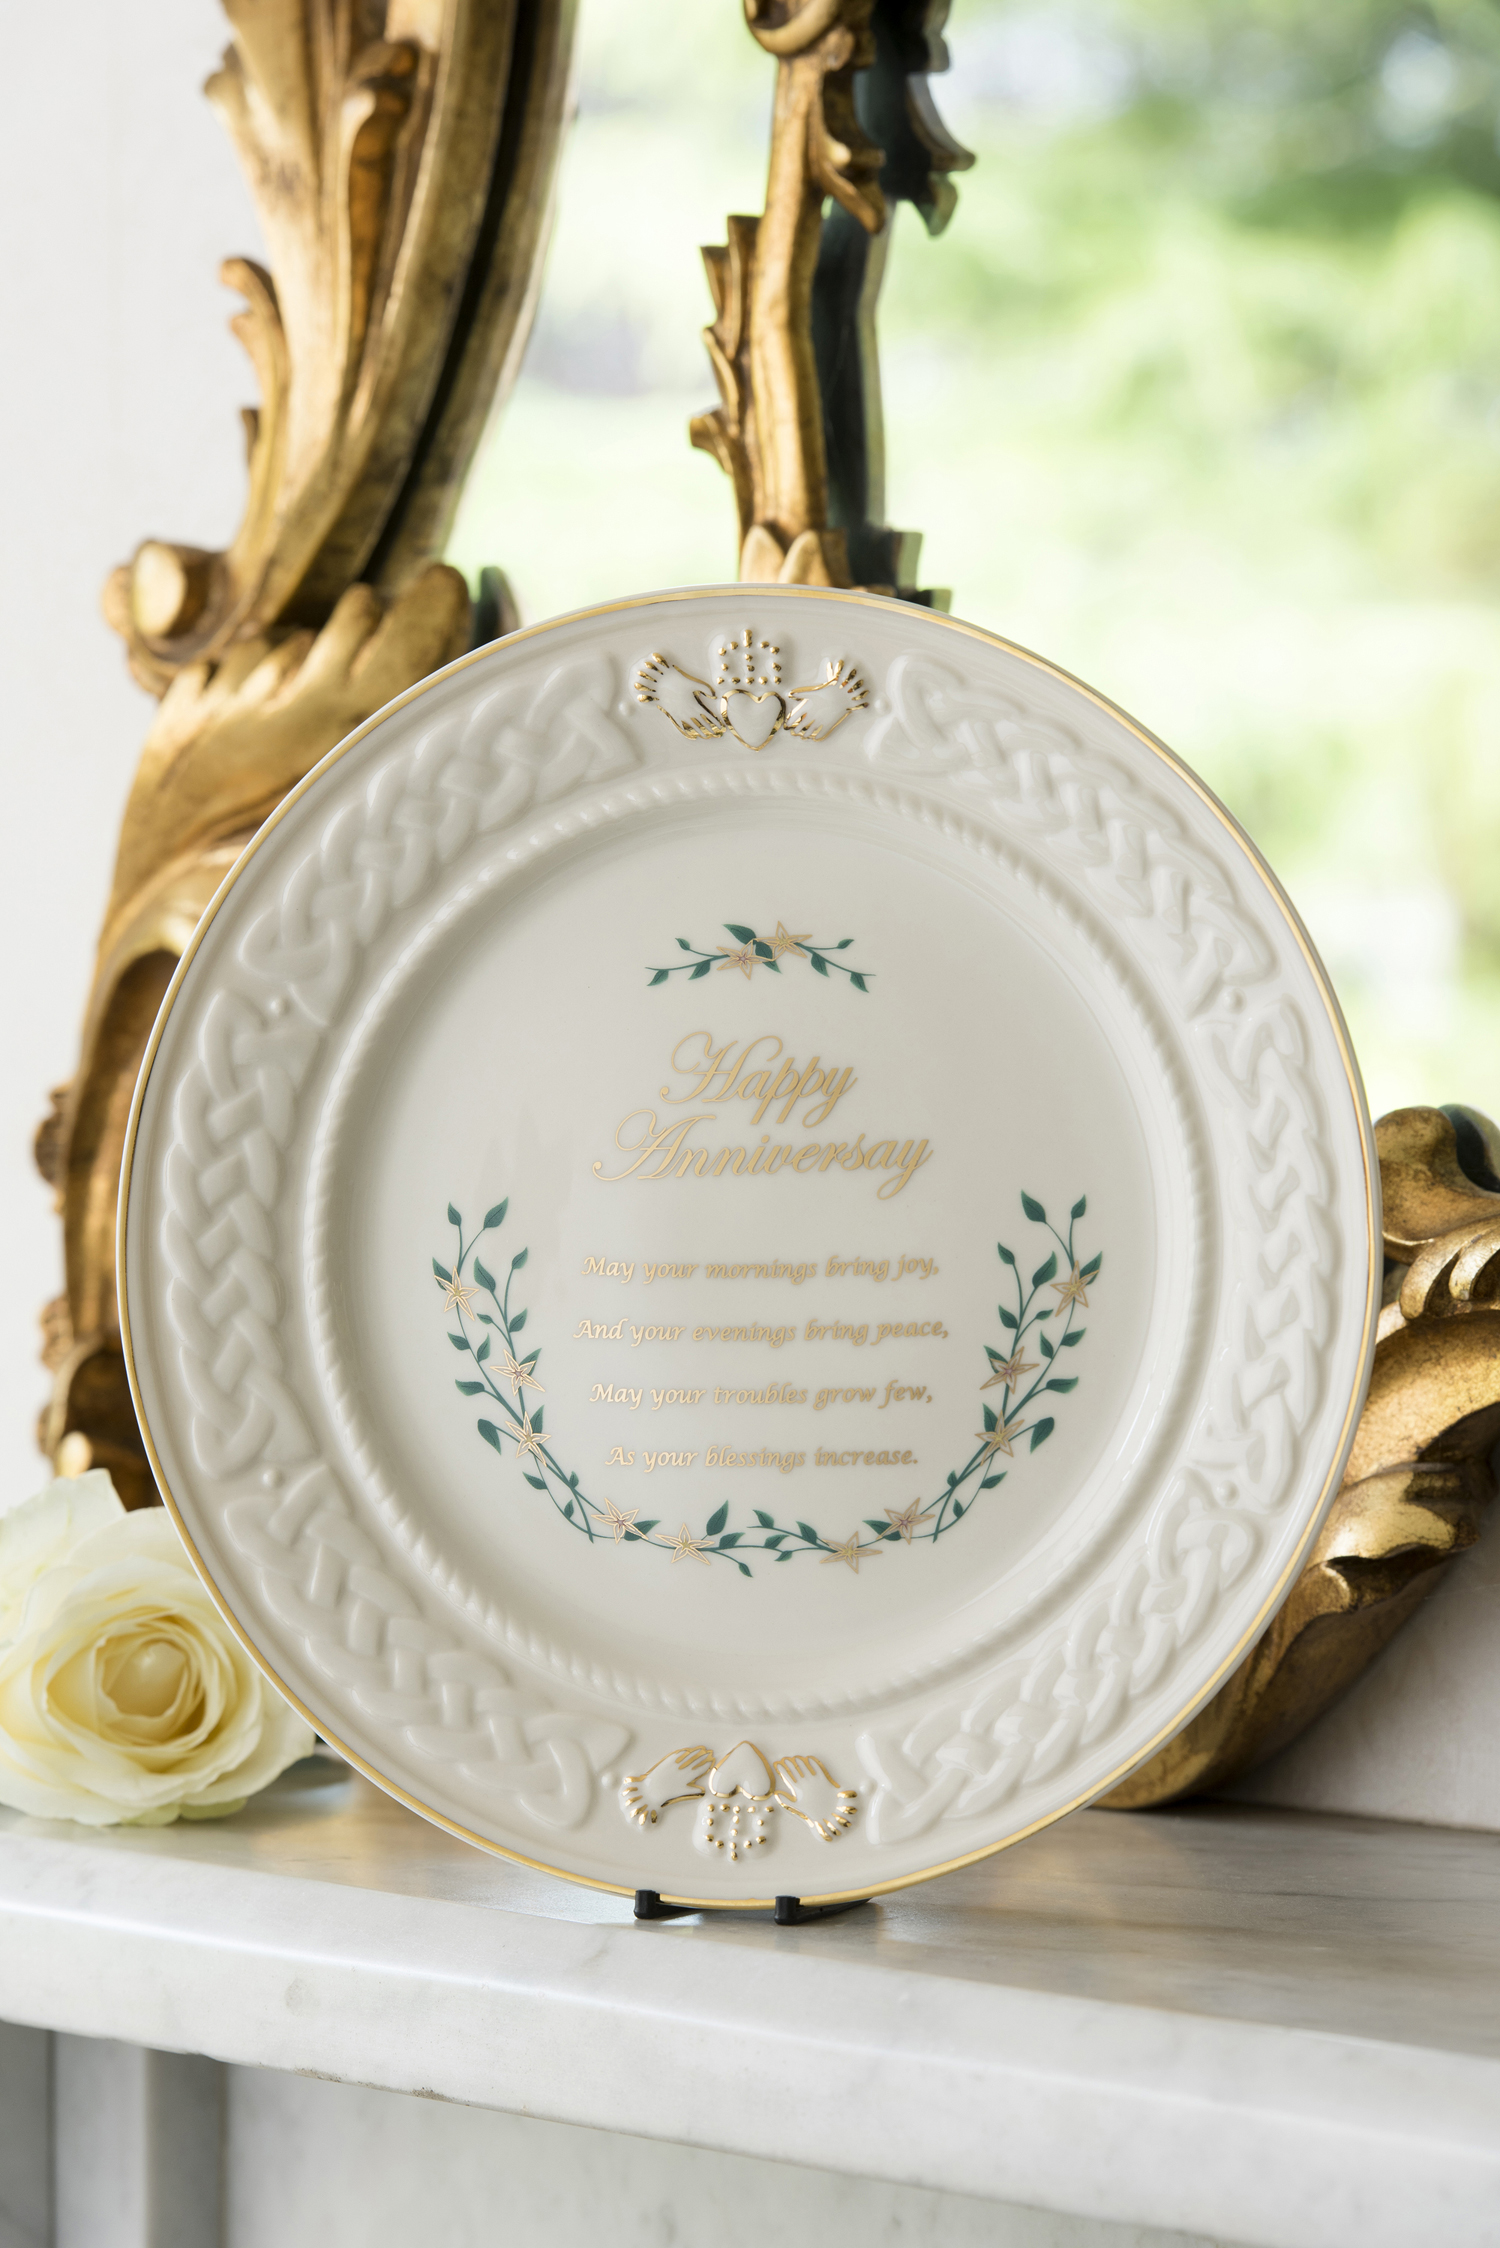 Product image for Belleek Happy Anniversary Plate